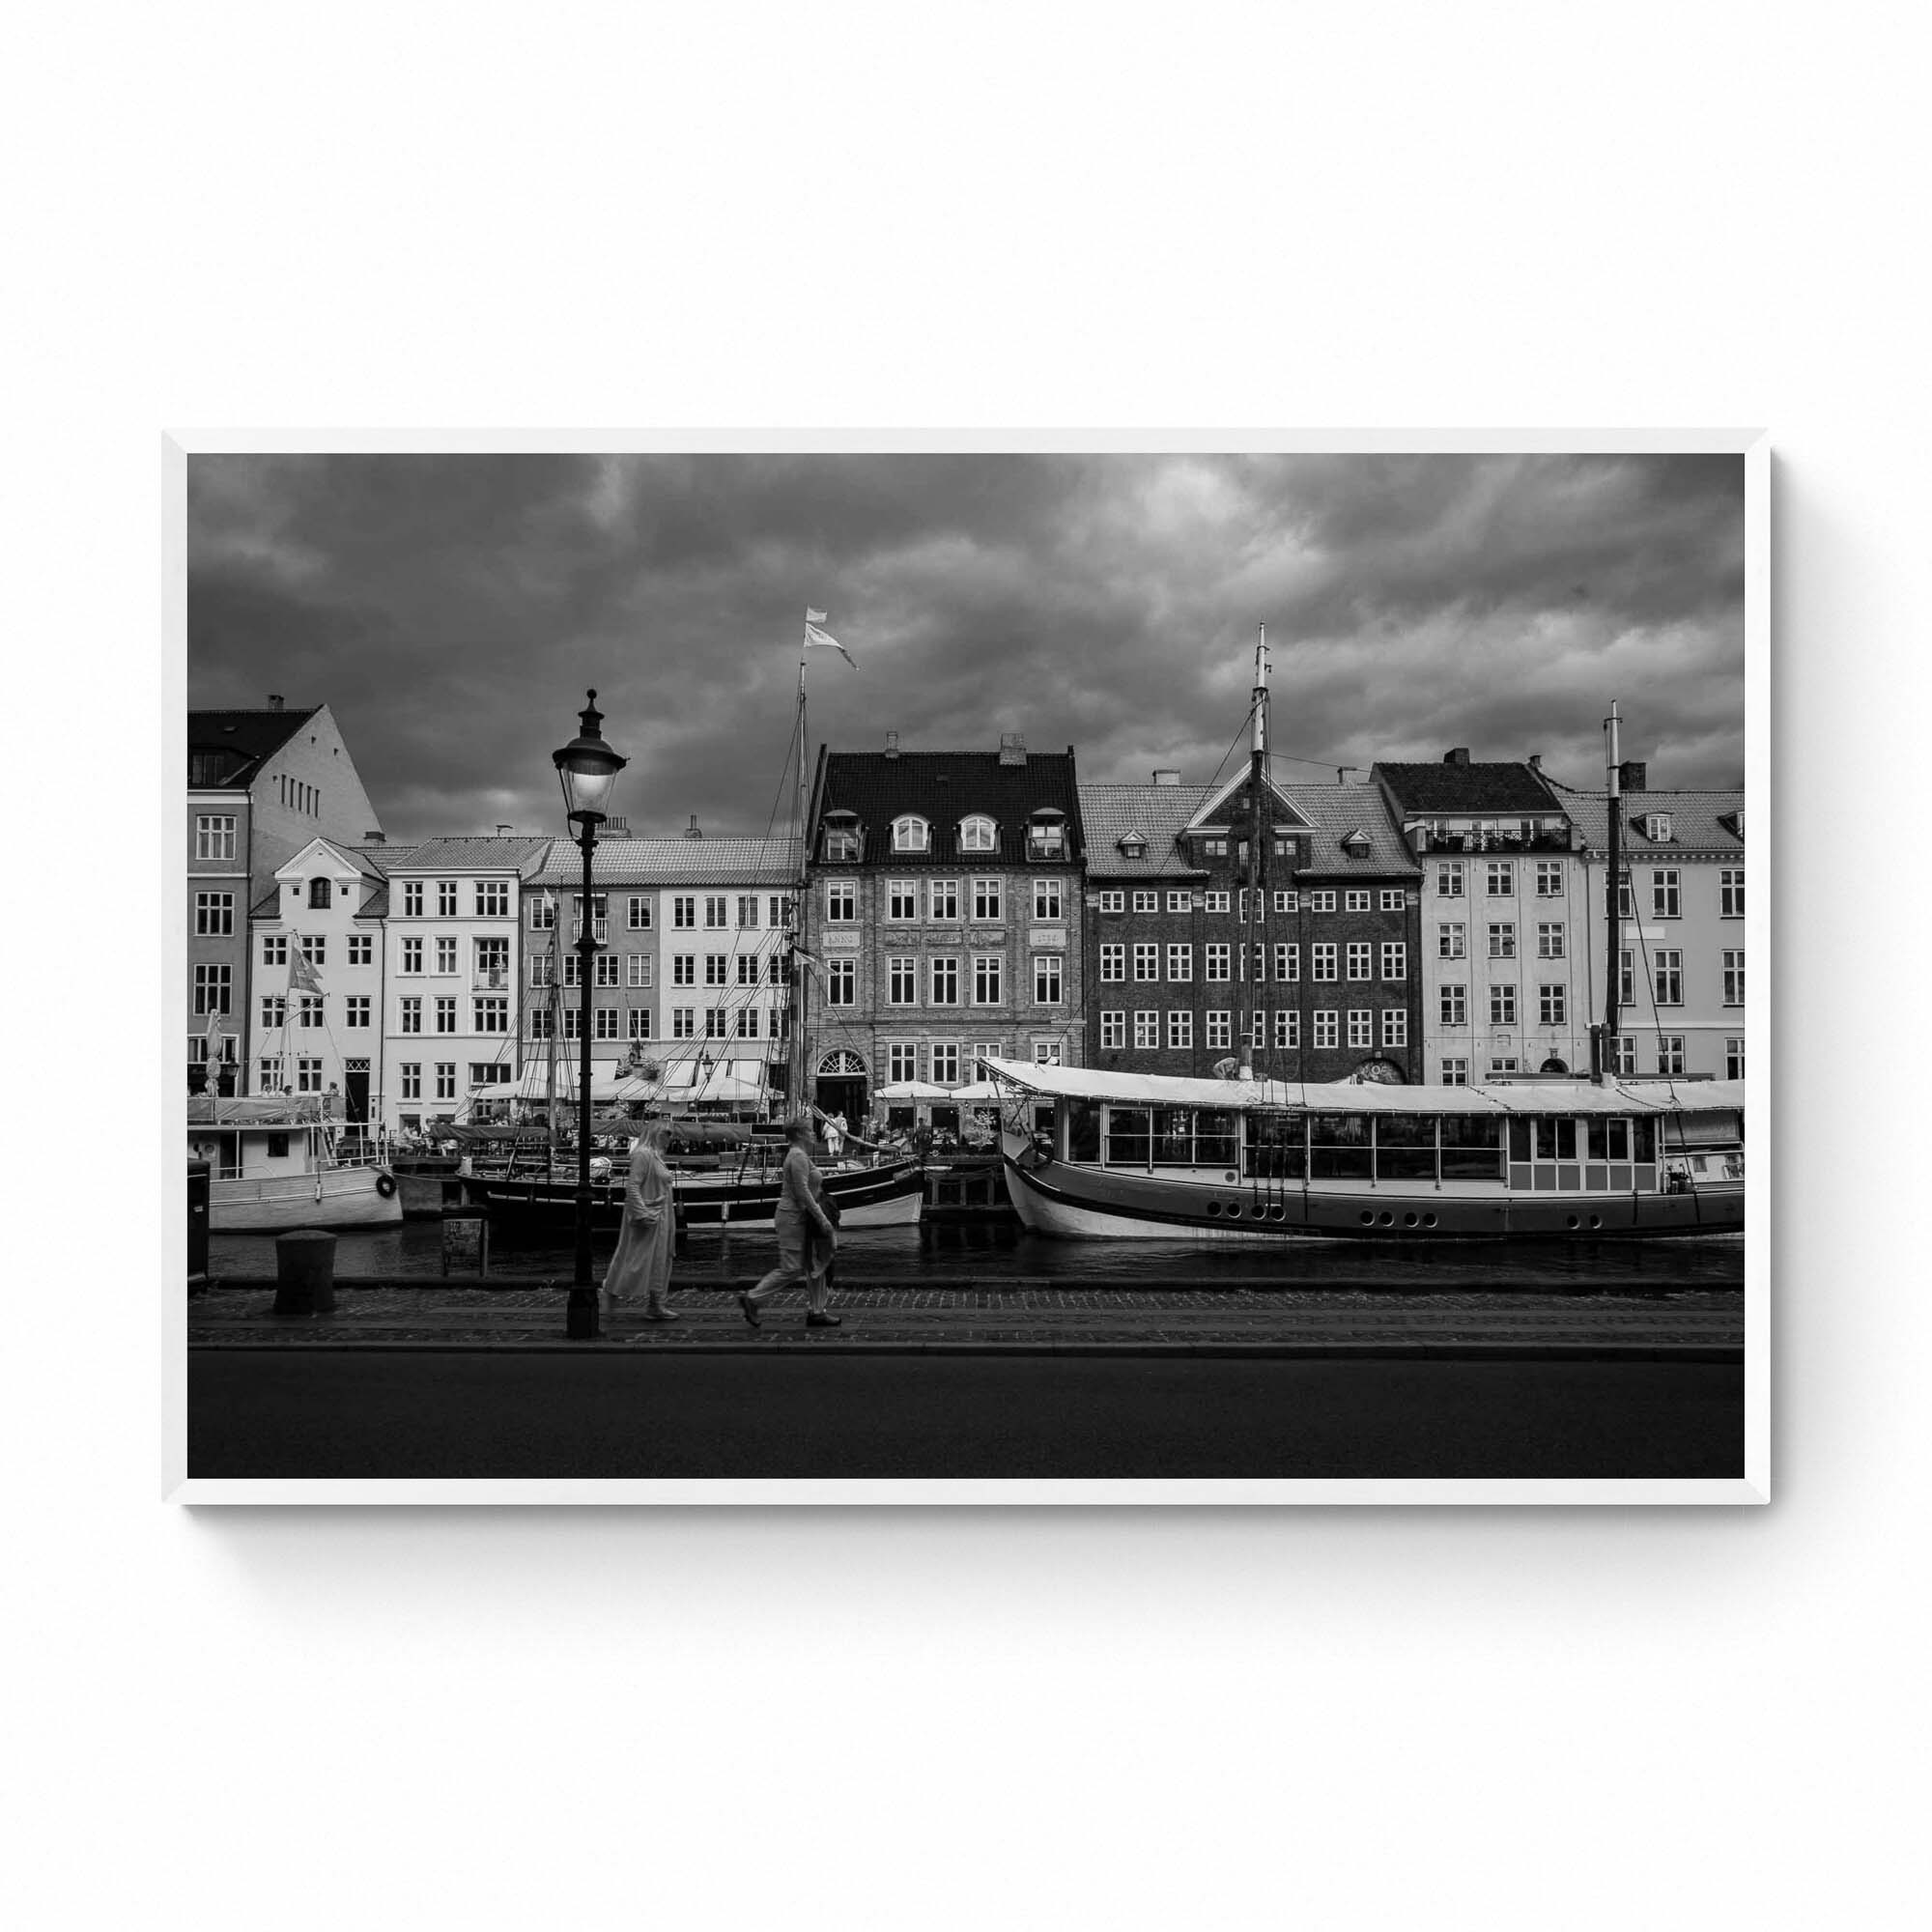 Black and white image of Nyhavn, Copenhagen, with historical buildings along the waterfront, boats docked in the canal, and people walking by.